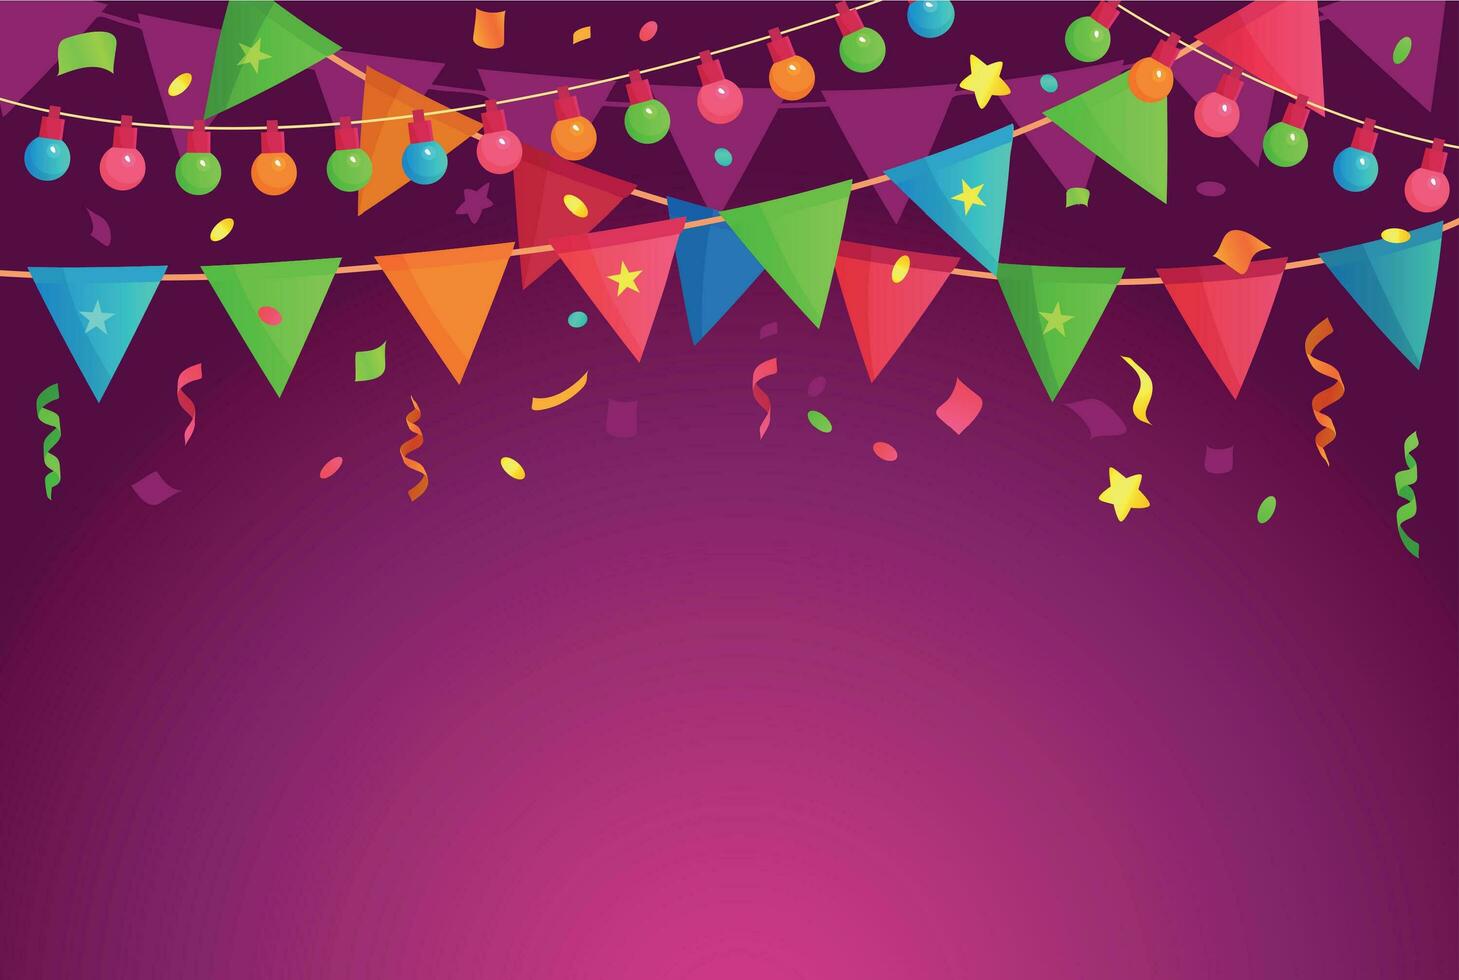 Cartoon decoration party. Celebrate birthday flags with confetti, festival background and fun event decorations vector illustration